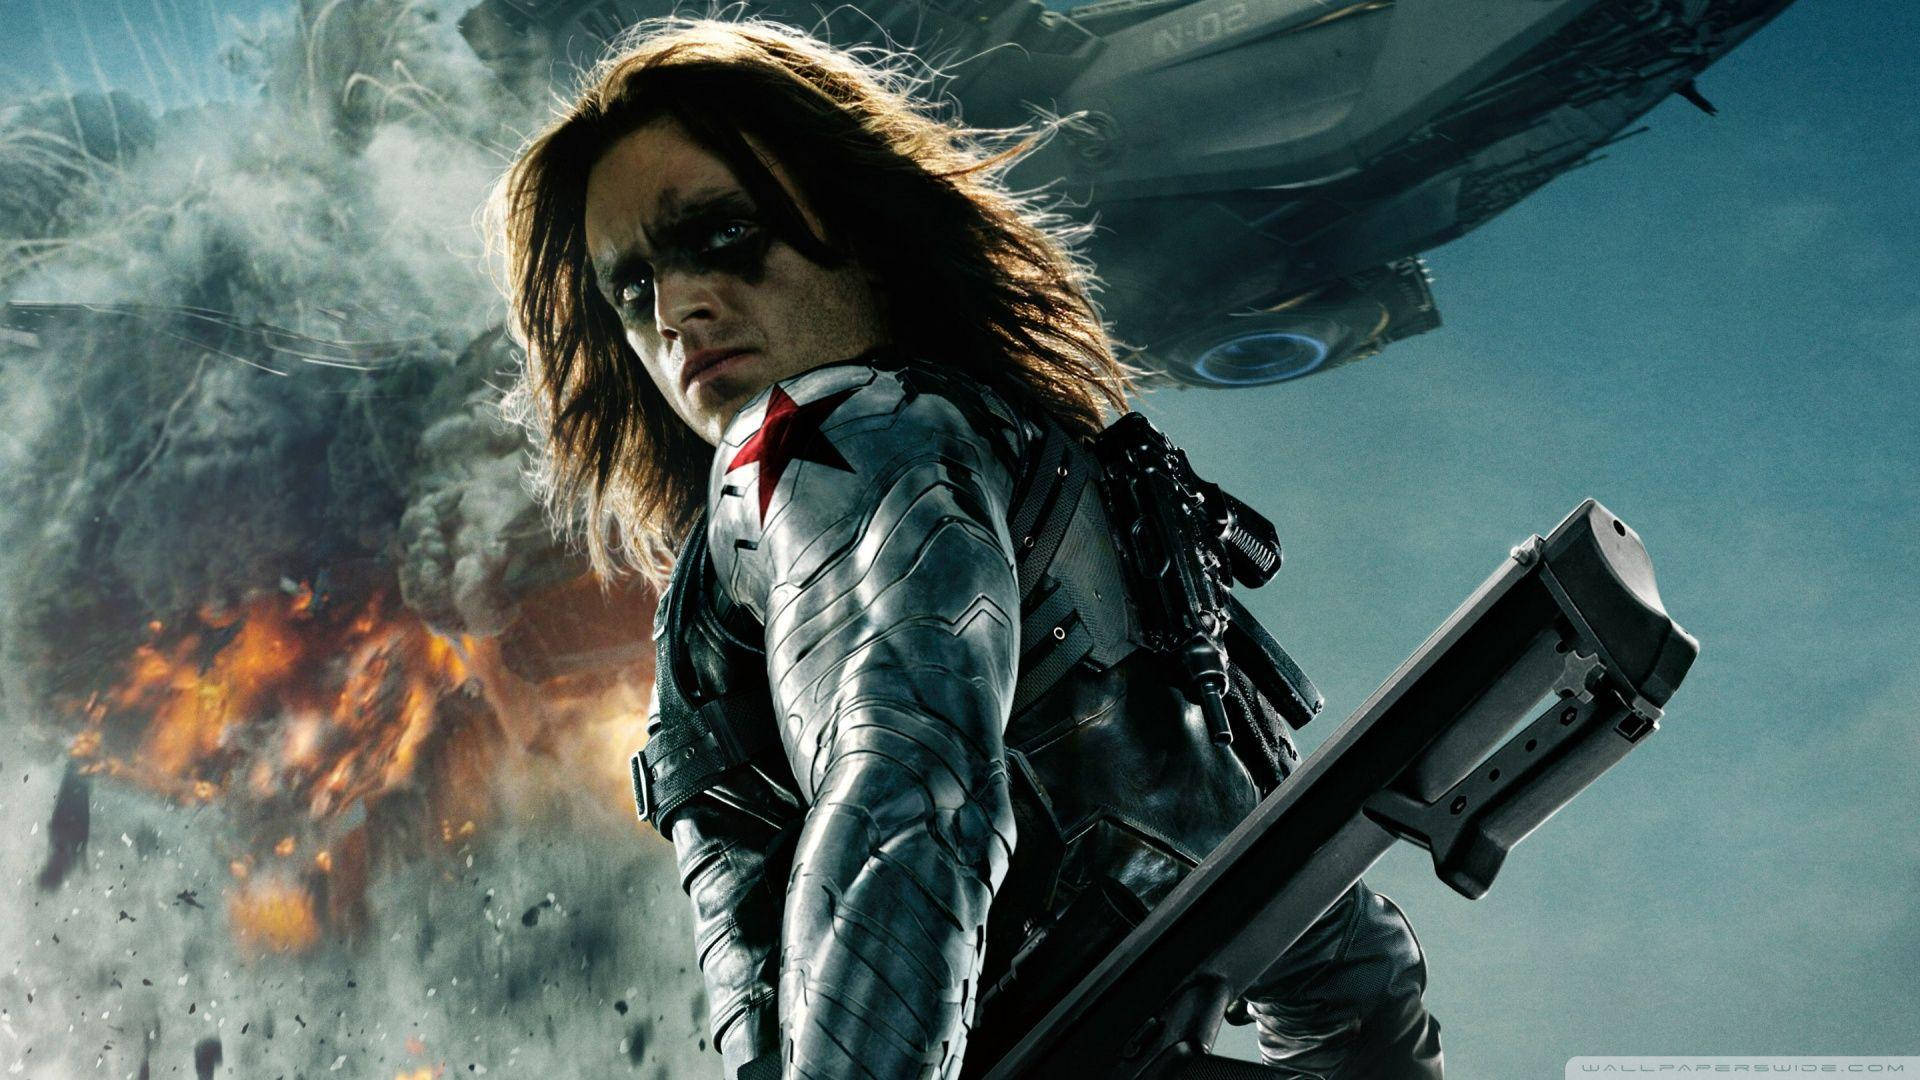 Bucky Barnes, Known By His Winter Soldier Identity, Stares Off Into The Horizon.